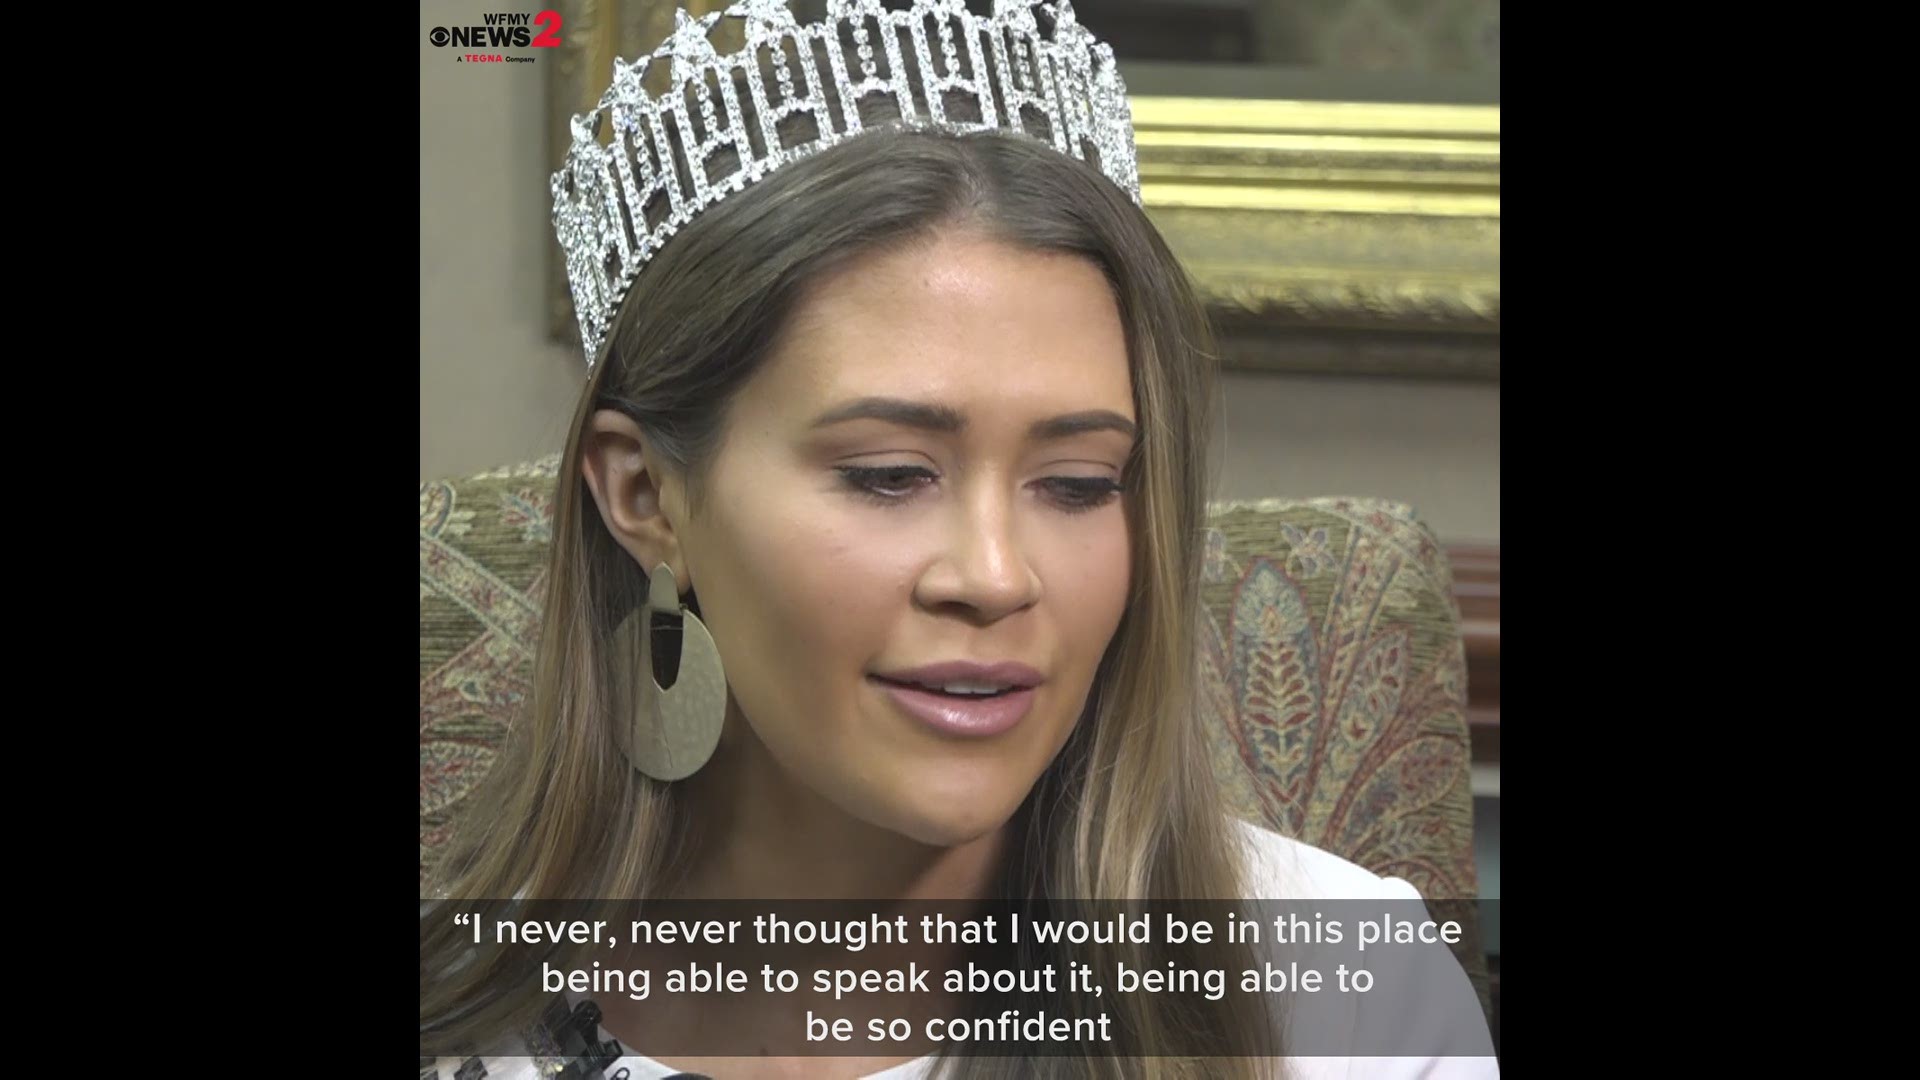 During her time as Miss North Carolina USA, Caelynn Miller-Keyes goal is to improve Title IX policies for sexual assault survivors by addressing potential policy changes at colleges and universities around the state.